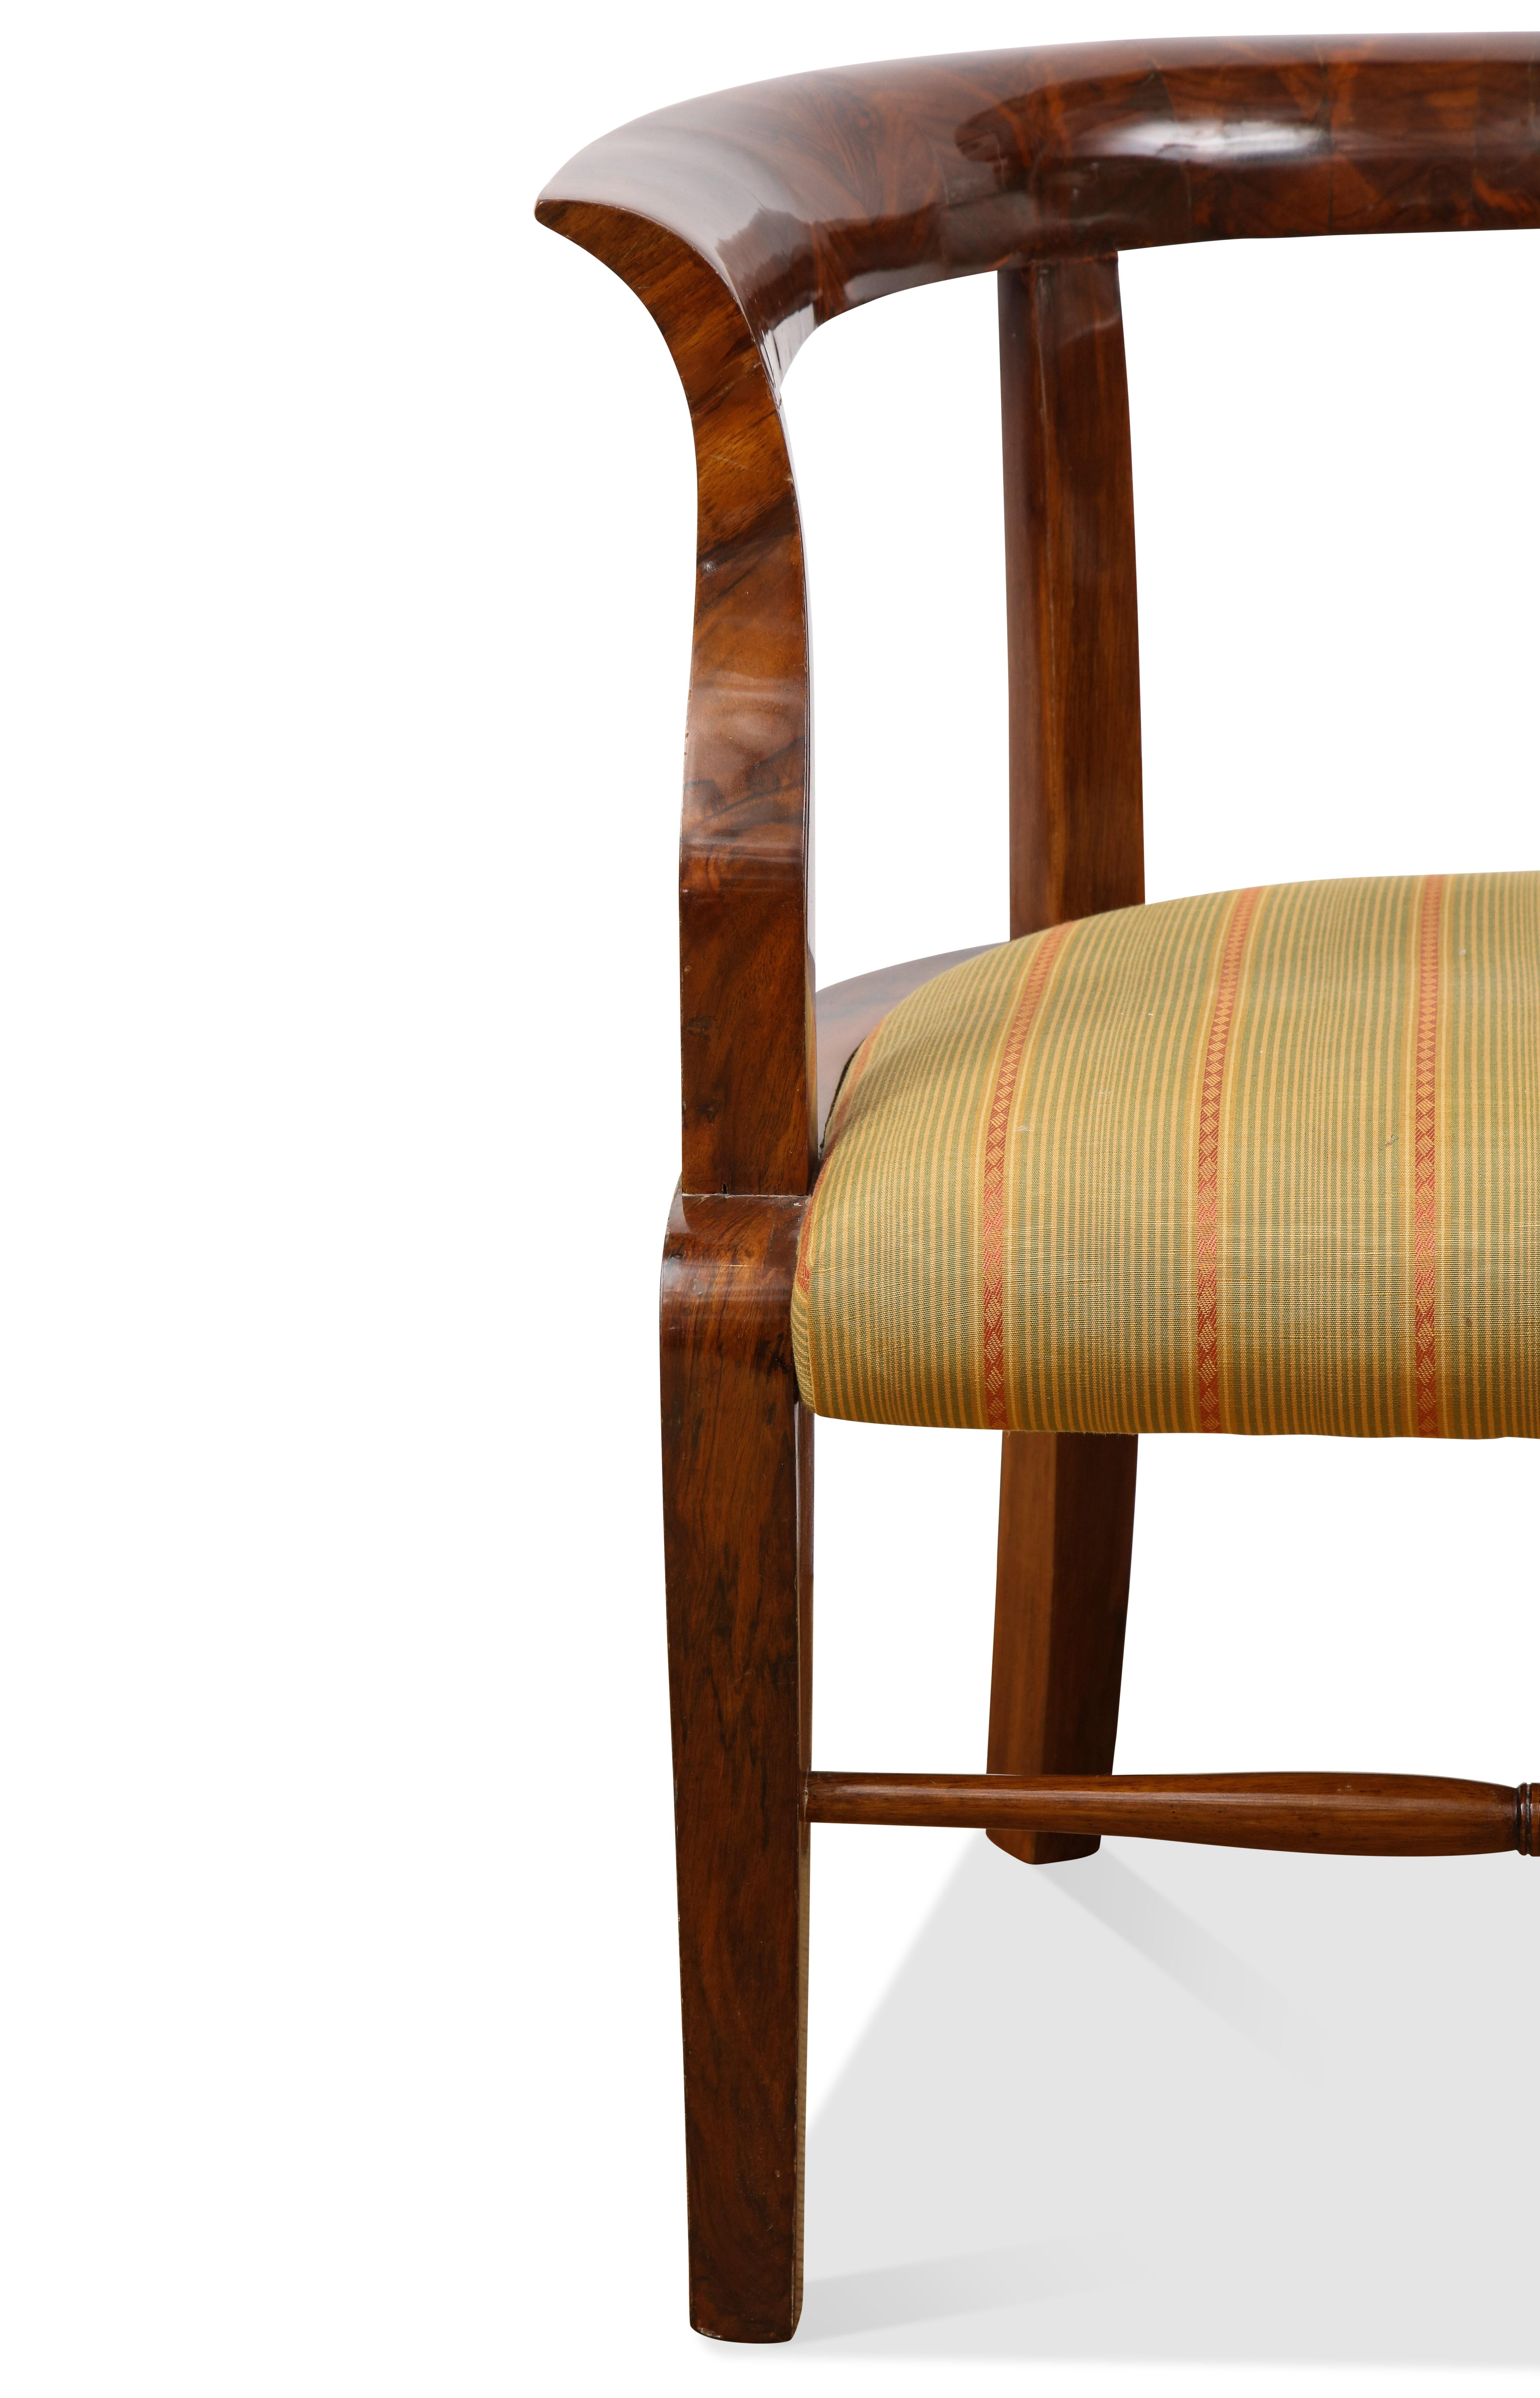 The stylized klismo back with upholstered seat supported by 4 legs the front having a central rail.
 